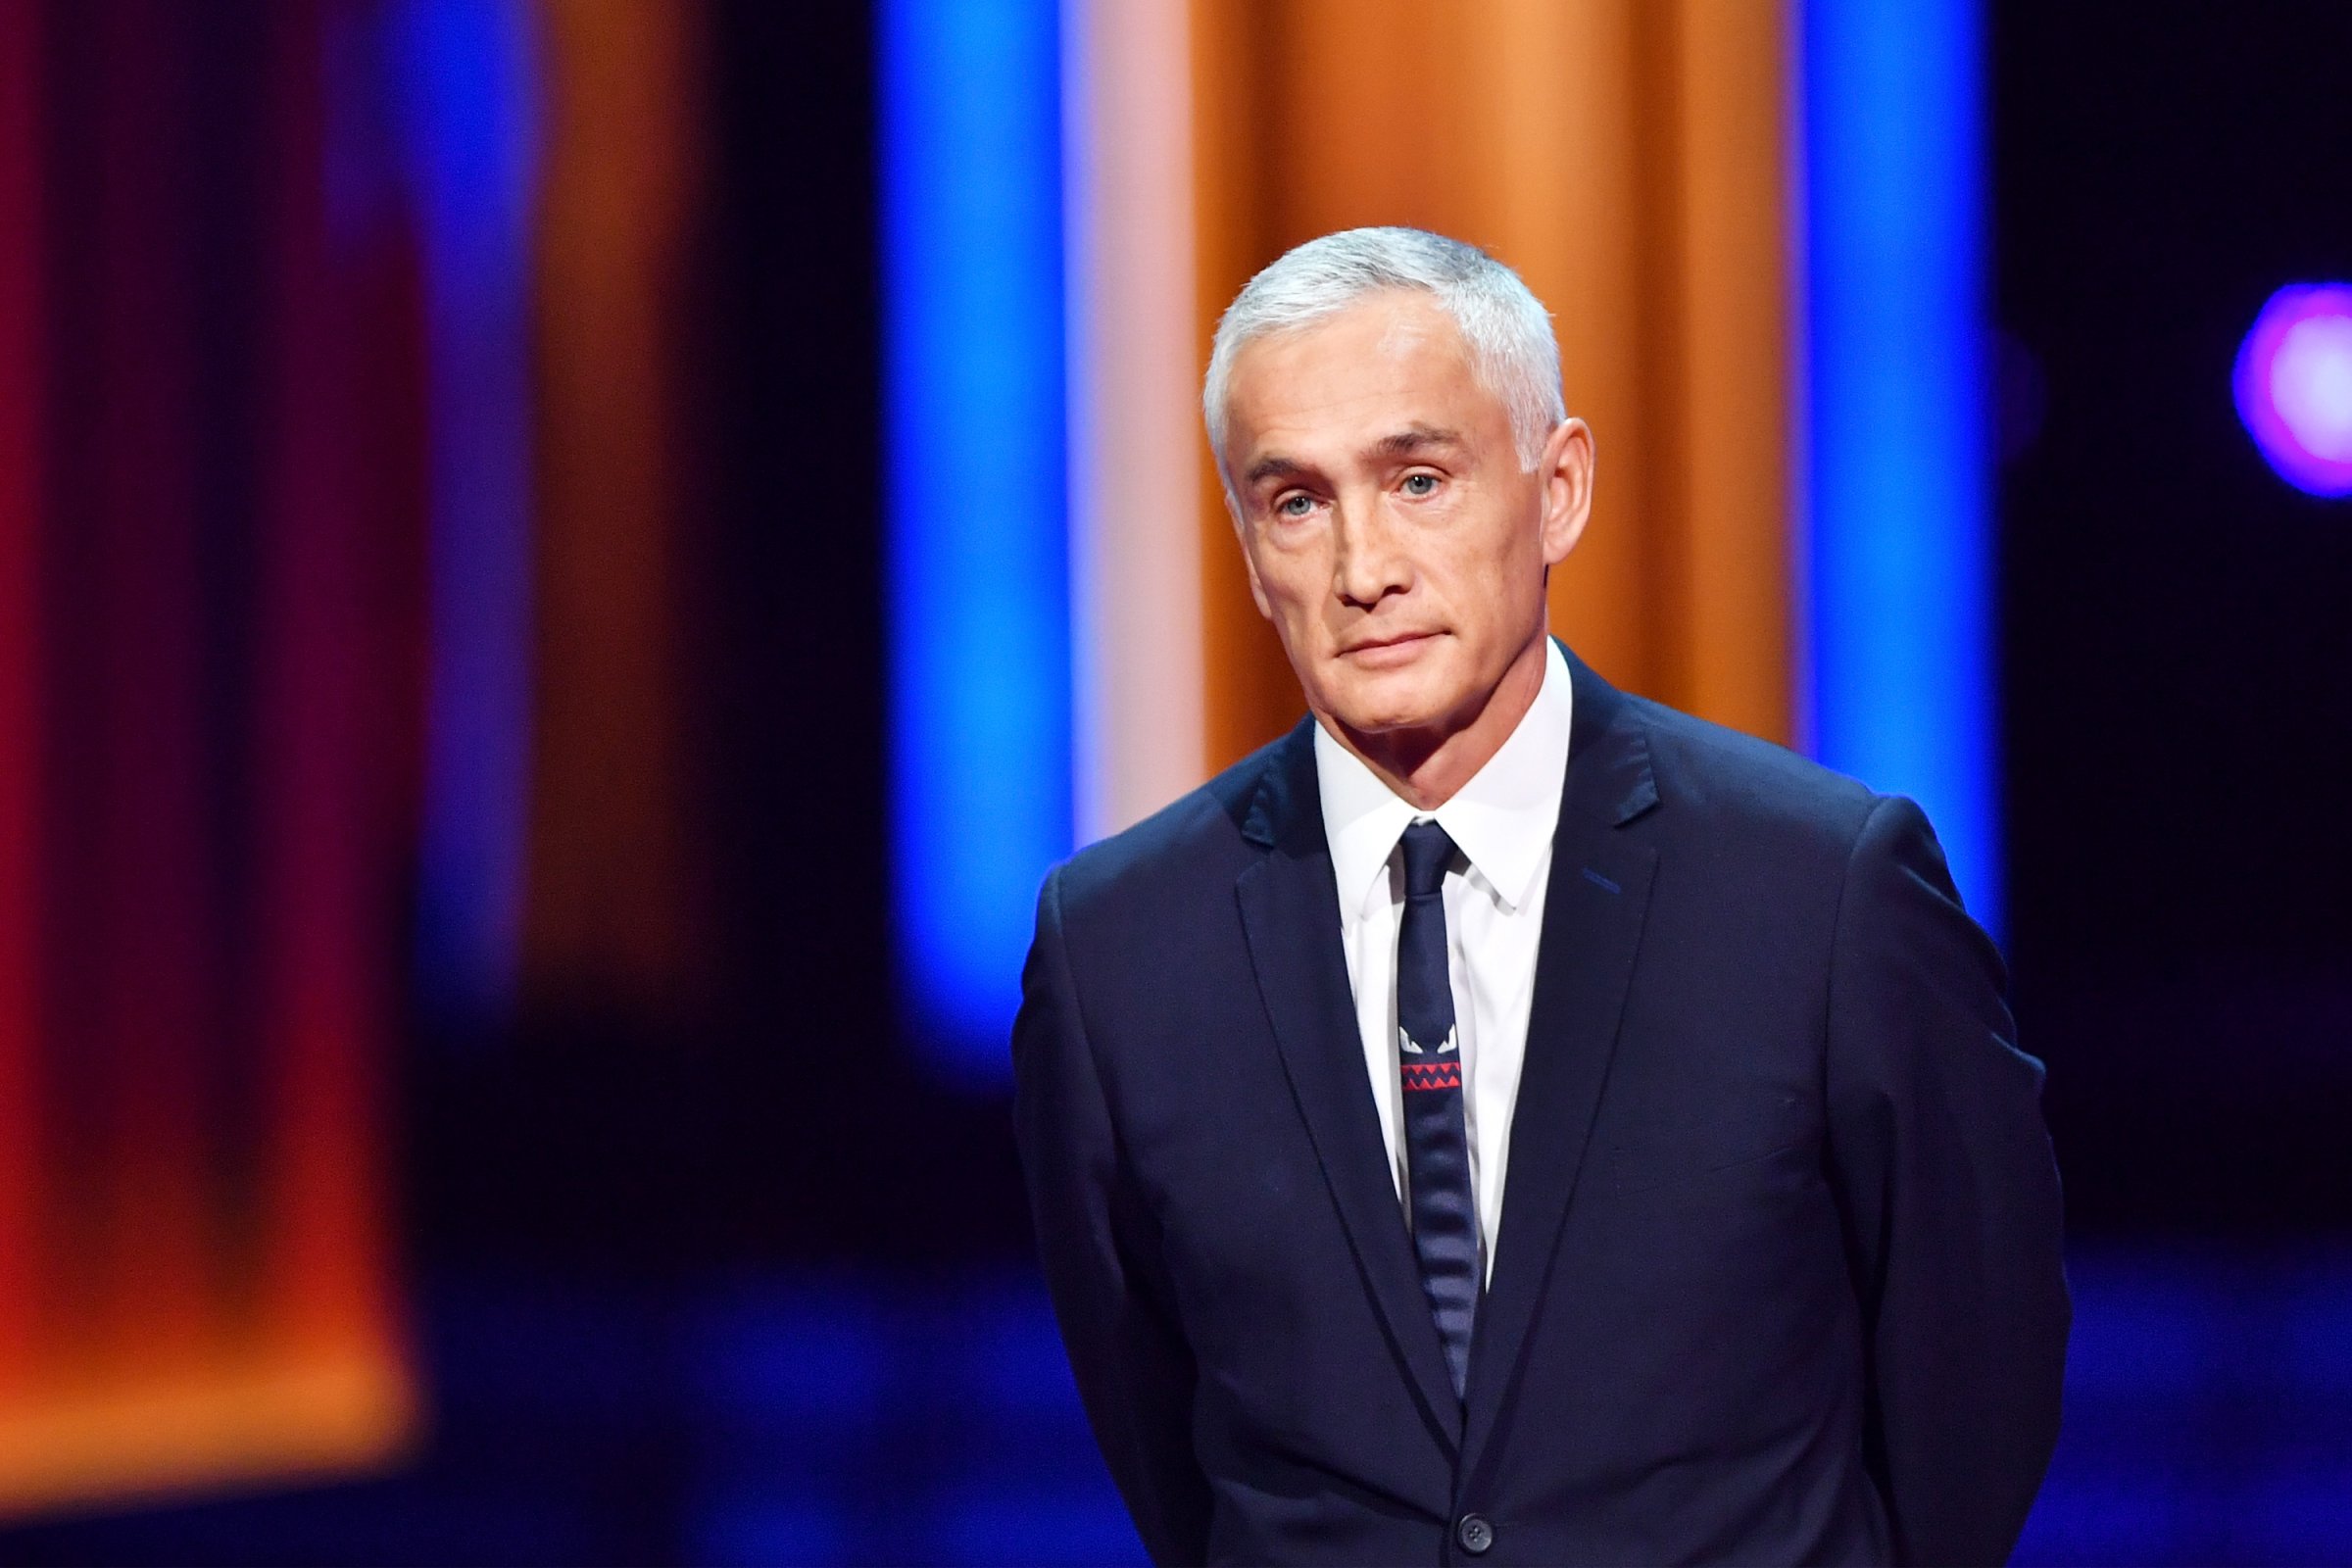 Jorge Ramos speaks onstage during Univision's 29th Edition of Premio Lo Nuestro A La Musica Latina at the American Airlines Arena on Feb. 23, 2017 in Miami, Florida.